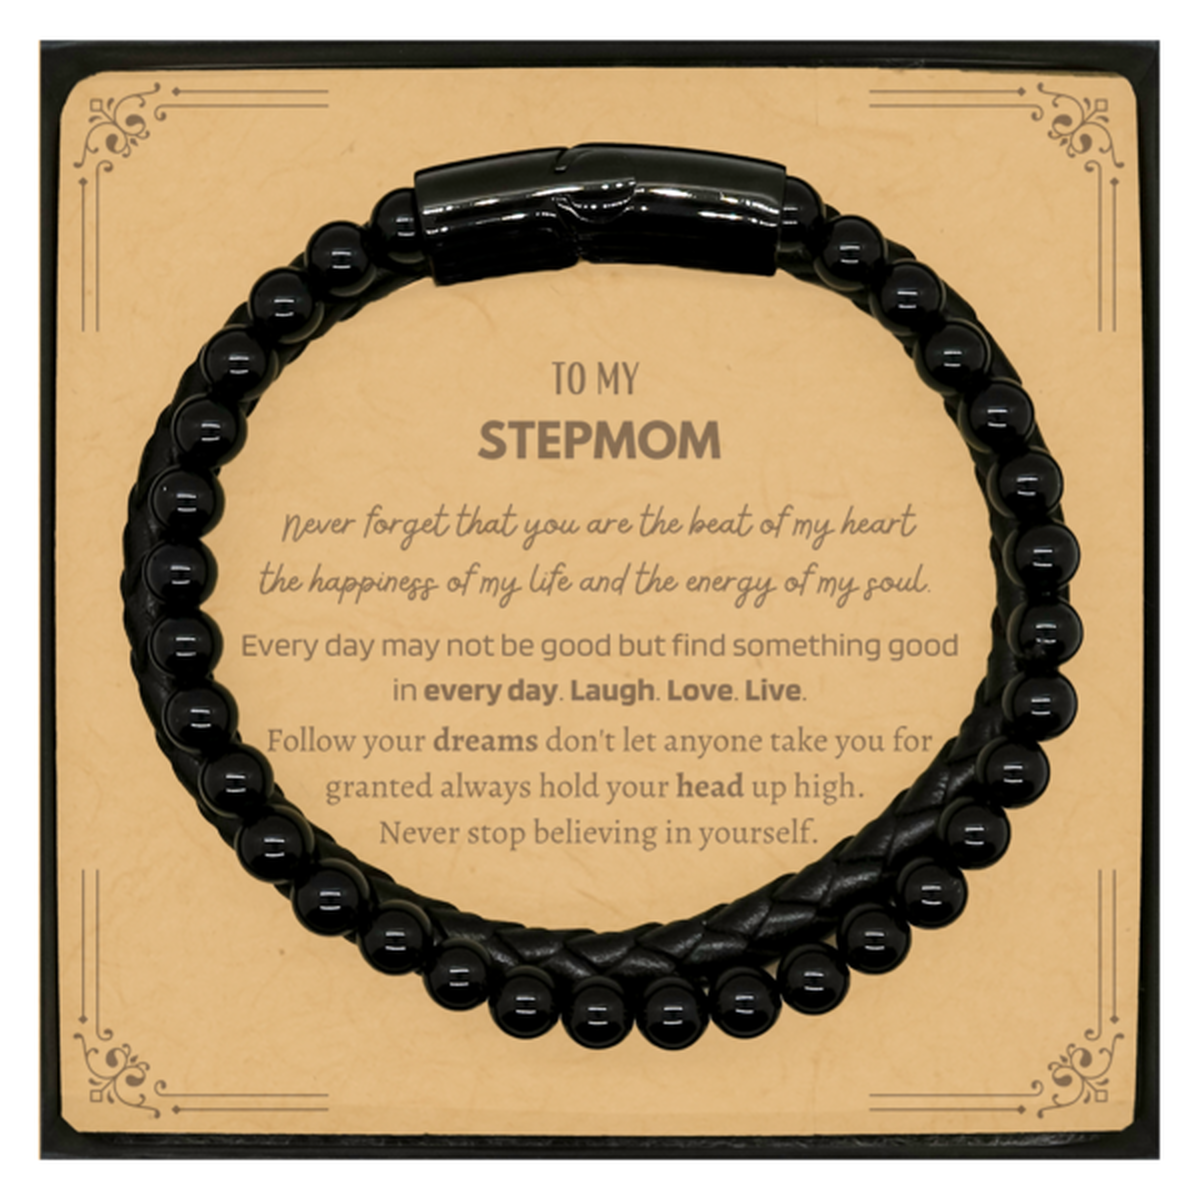 To My Stepmom Message Card Gifts, Christmas Stepmom Stone Leather Bracelets Present, Birthday Unique Motivational For Stepmom, To My Stepmom Never forget that you are the beat of my heart the happiness of my life and the energy of my soul